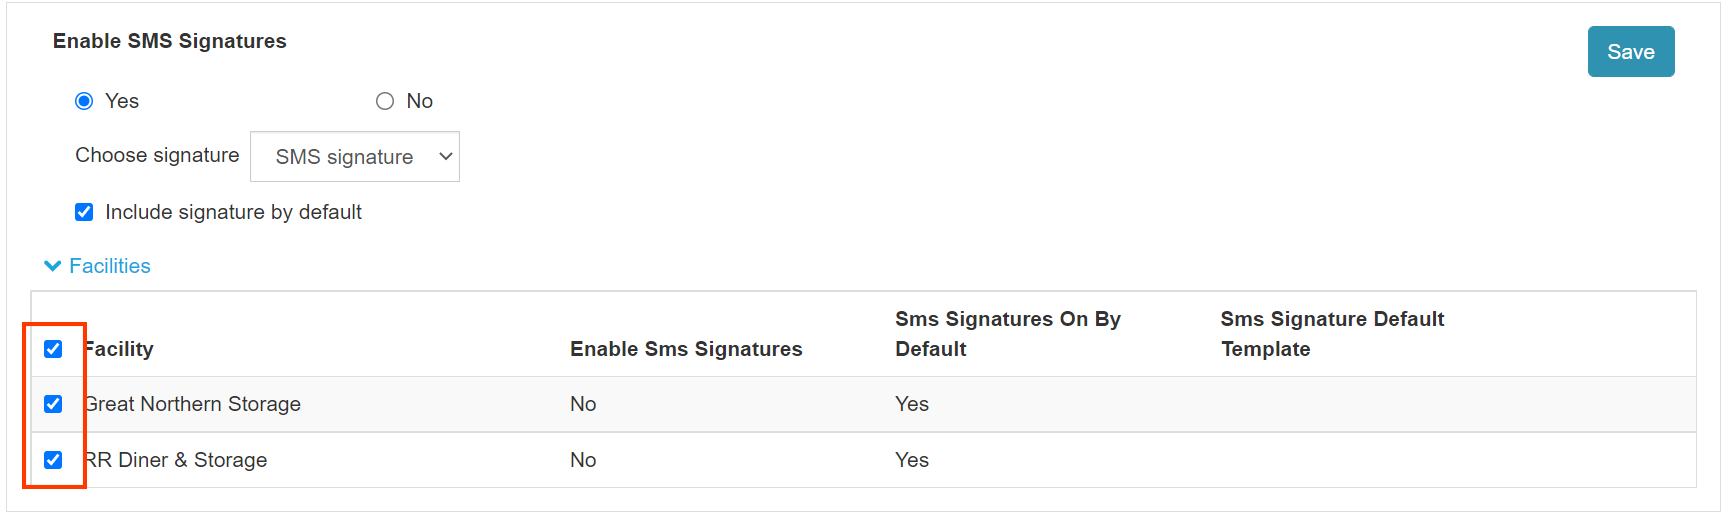 sms_signature_select_facilities.png